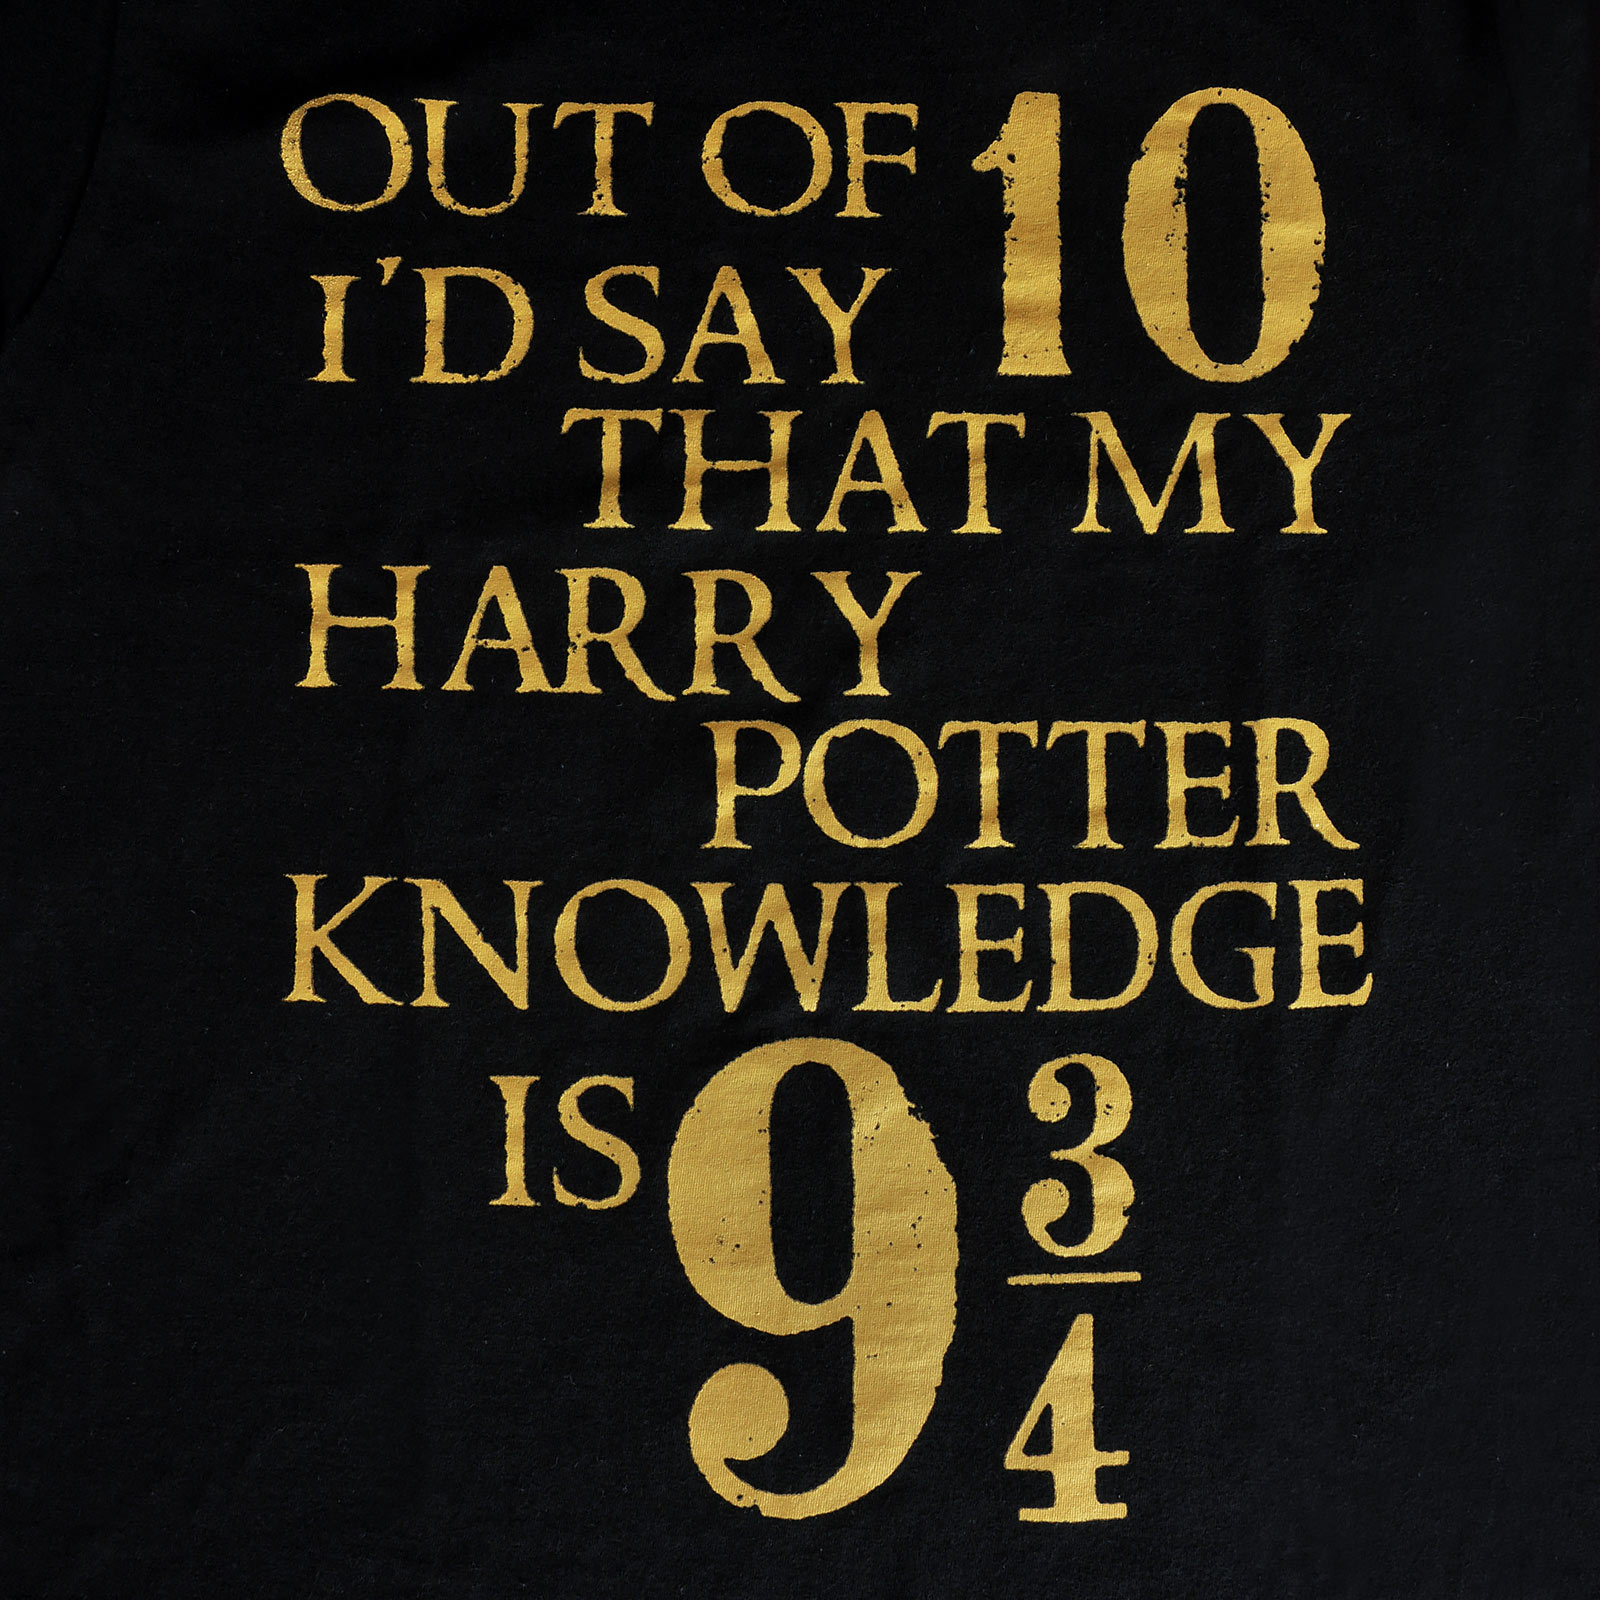 Harry Potter - Knowledge 9 3/4 Out of 10 T-Shirt Black